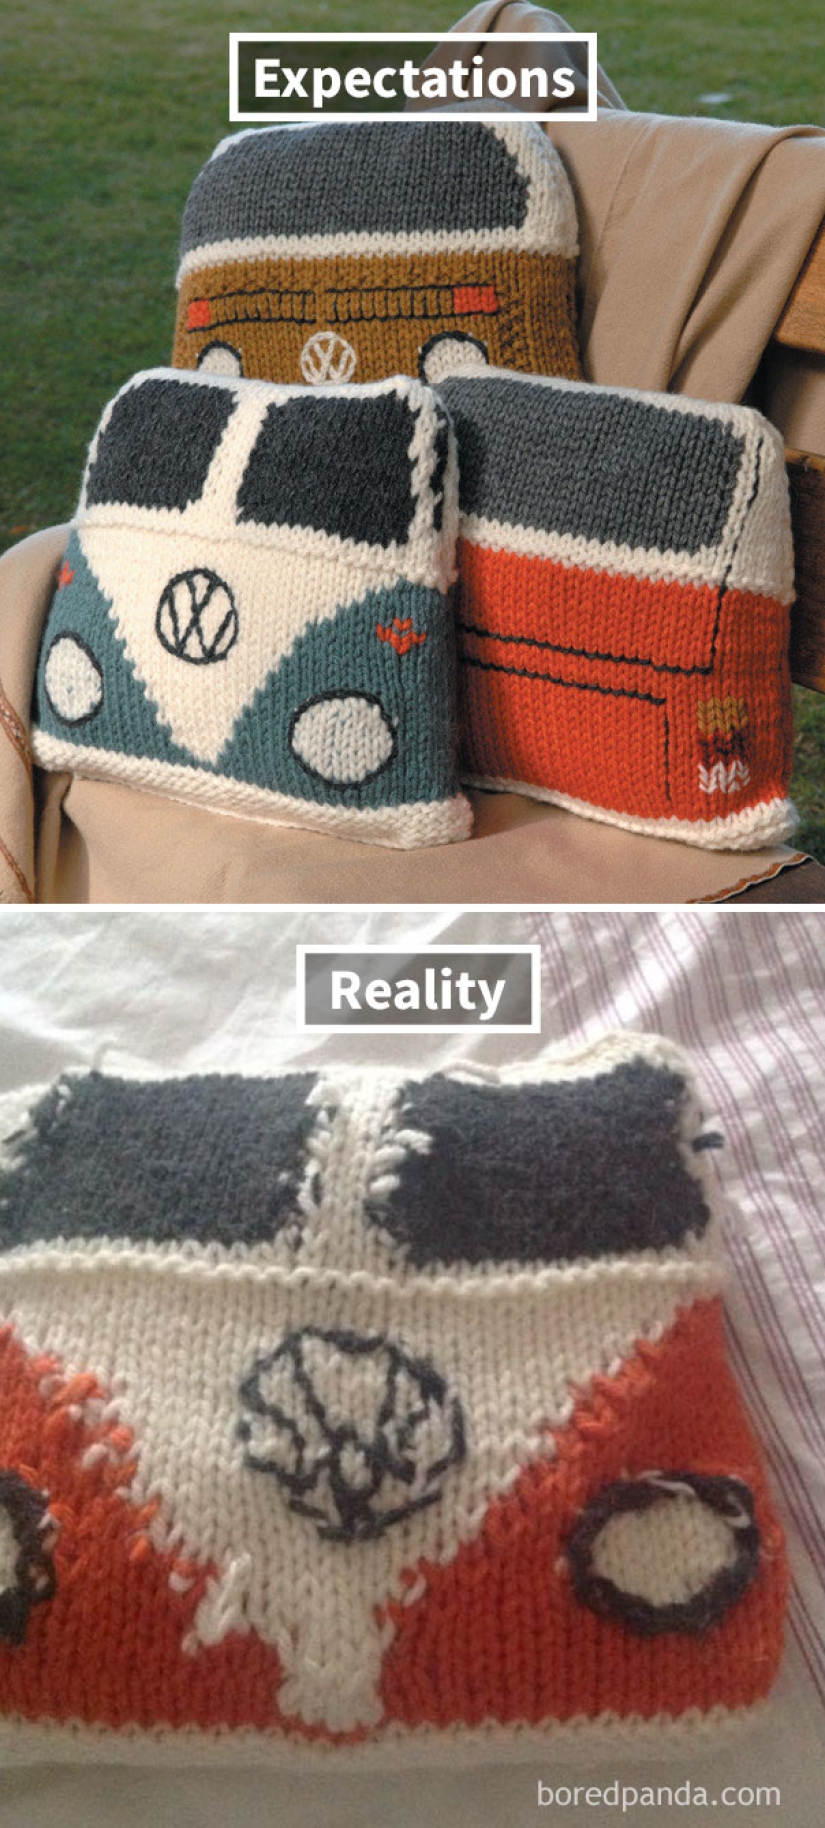 Creative crafts with their hands: expectation and reality